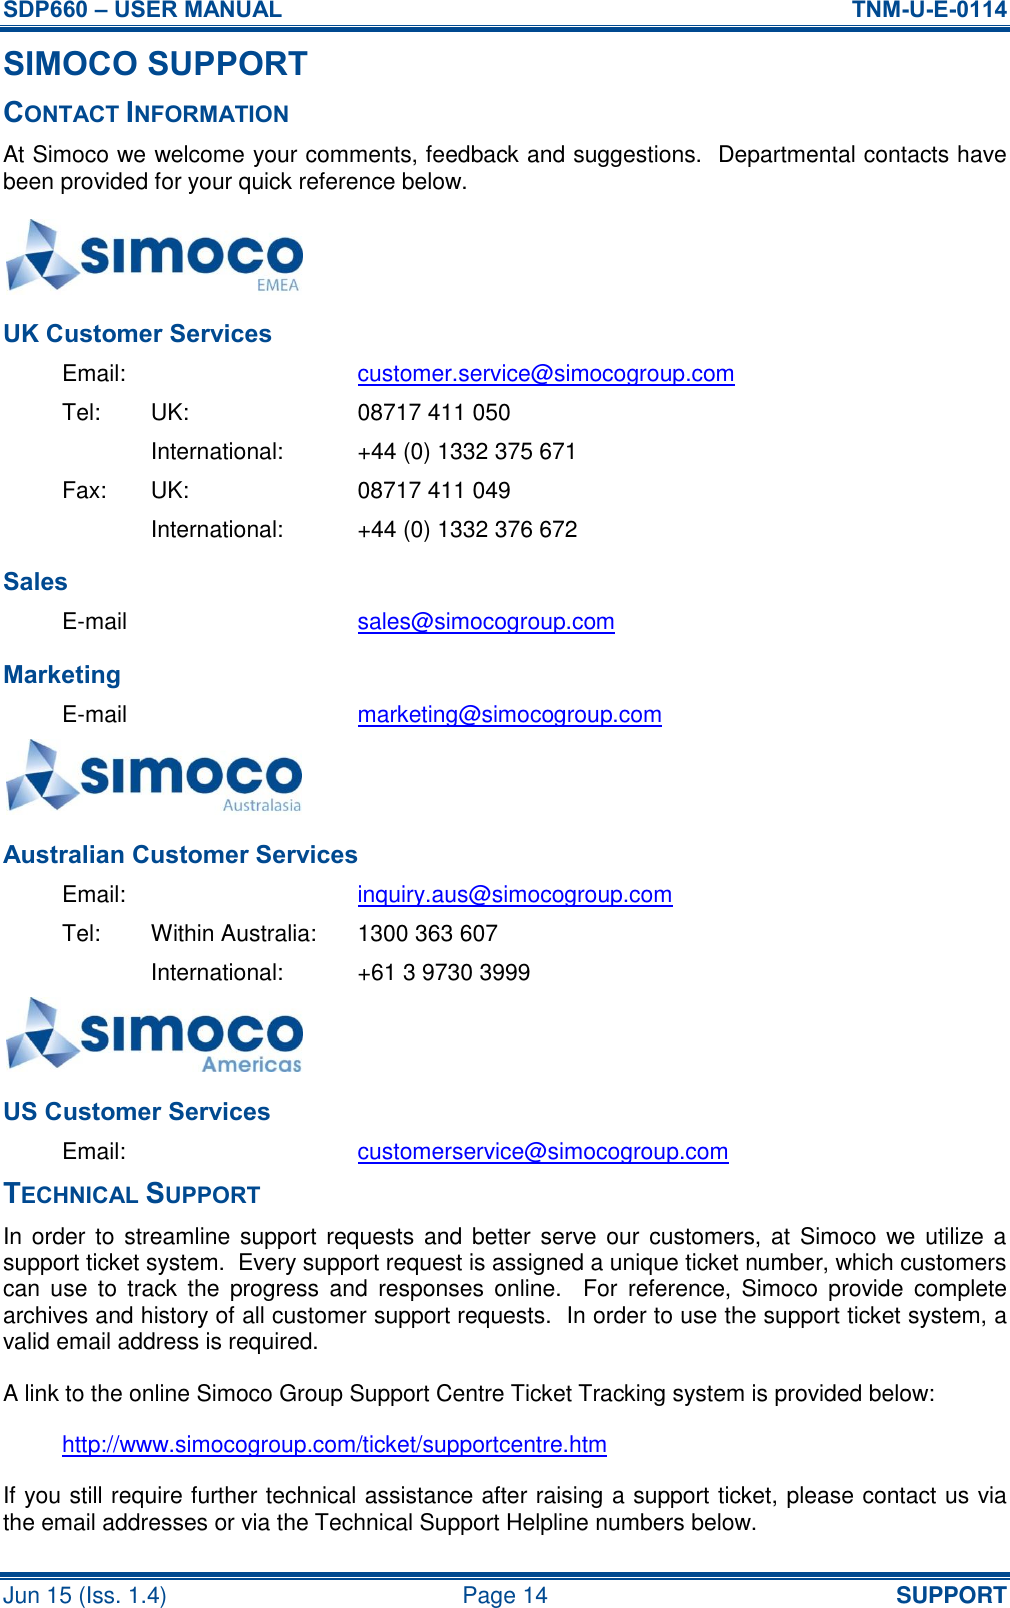 SDP660 – USER MANUAL  TNM-U-E-0114 Jun 15 (Iss. 1.4)  Page 14 SUPPORT SIMOCO SUPPORT CONTACT INFORMATION At Simoco we welcome your comments, feedback and suggestions.  Departmental contacts have been provided for your quick reference below.  UK Customer Services Email:  customer.service@simocogroup.com Tel:  UK:  08717 411 050   International:  +44 (0) 1332 375 671 Fax:  UK:  08717 411 049   International:  +44 (0) 1332 376 672 Sales E-mail  sales@simocogroup.com Marketing E-mail  marketing@simocogroup.com  Australian Customer Services Email:    inquiry.aus@simocogroup.com Tel:  Within Australia:  1300 363 607   International:  +61 3 9730 3999  US Customer Services Email:  customerservice@simocogroup.com TECHNICAL SUPPORT In order to  streamline  support  requests and better serve our customers, at  Simoco we utilize  a support ticket system.  Every support request is assigned a unique ticket number, which customers can  use  to  track  the  progress  and  responses online.    For  reference,  Simoco  provide  complete archives and history of all customer support requests.  In order to use the support ticket system, a valid email address is required. A link to the online Simoco Group Support Centre Ticket Tracking system is provided below: http://www.simocogroup.com/ticket/supportcentre.htm If you still require further technical assistance after raising a support ticket, please contact us via the email addresses or via the Technical Support Helpline numbers below. 